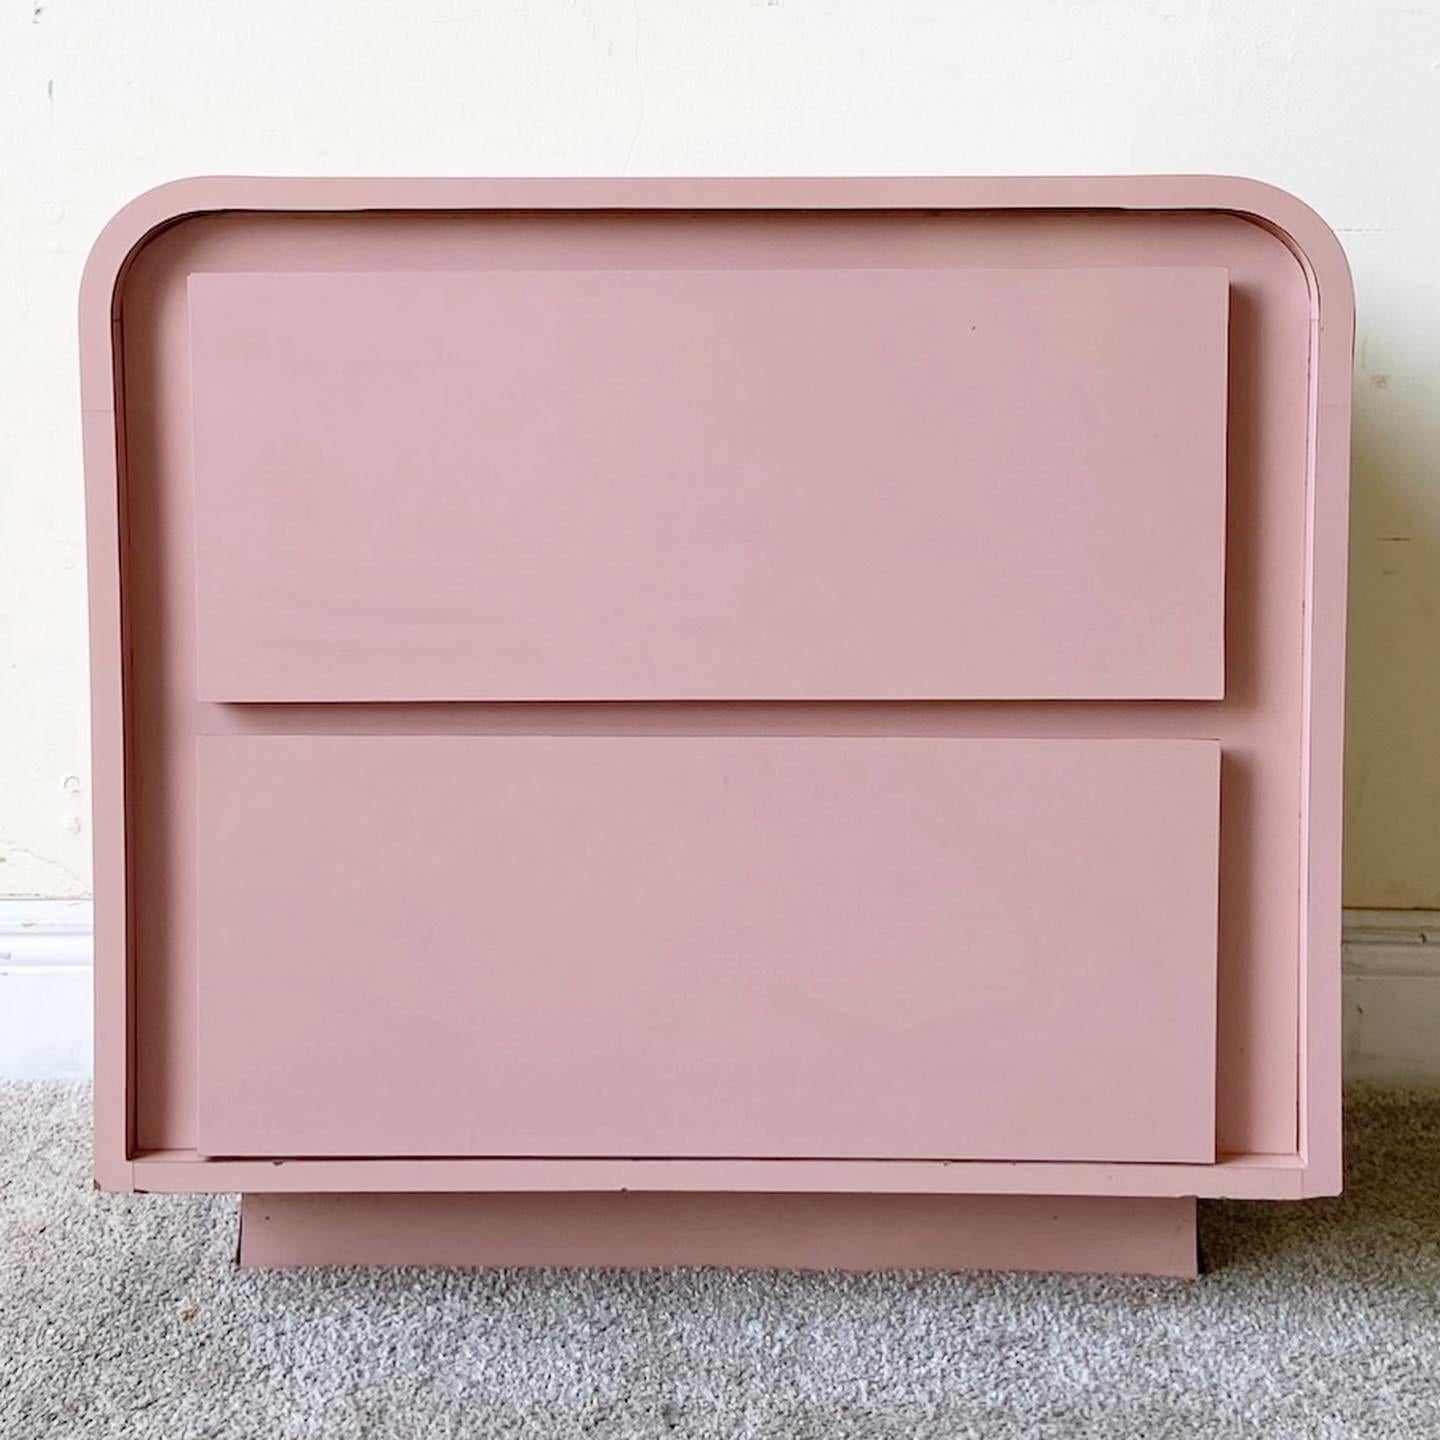 Late 20th Century Postmodern Pink Lacquer Laminate Waterfall Nightstand